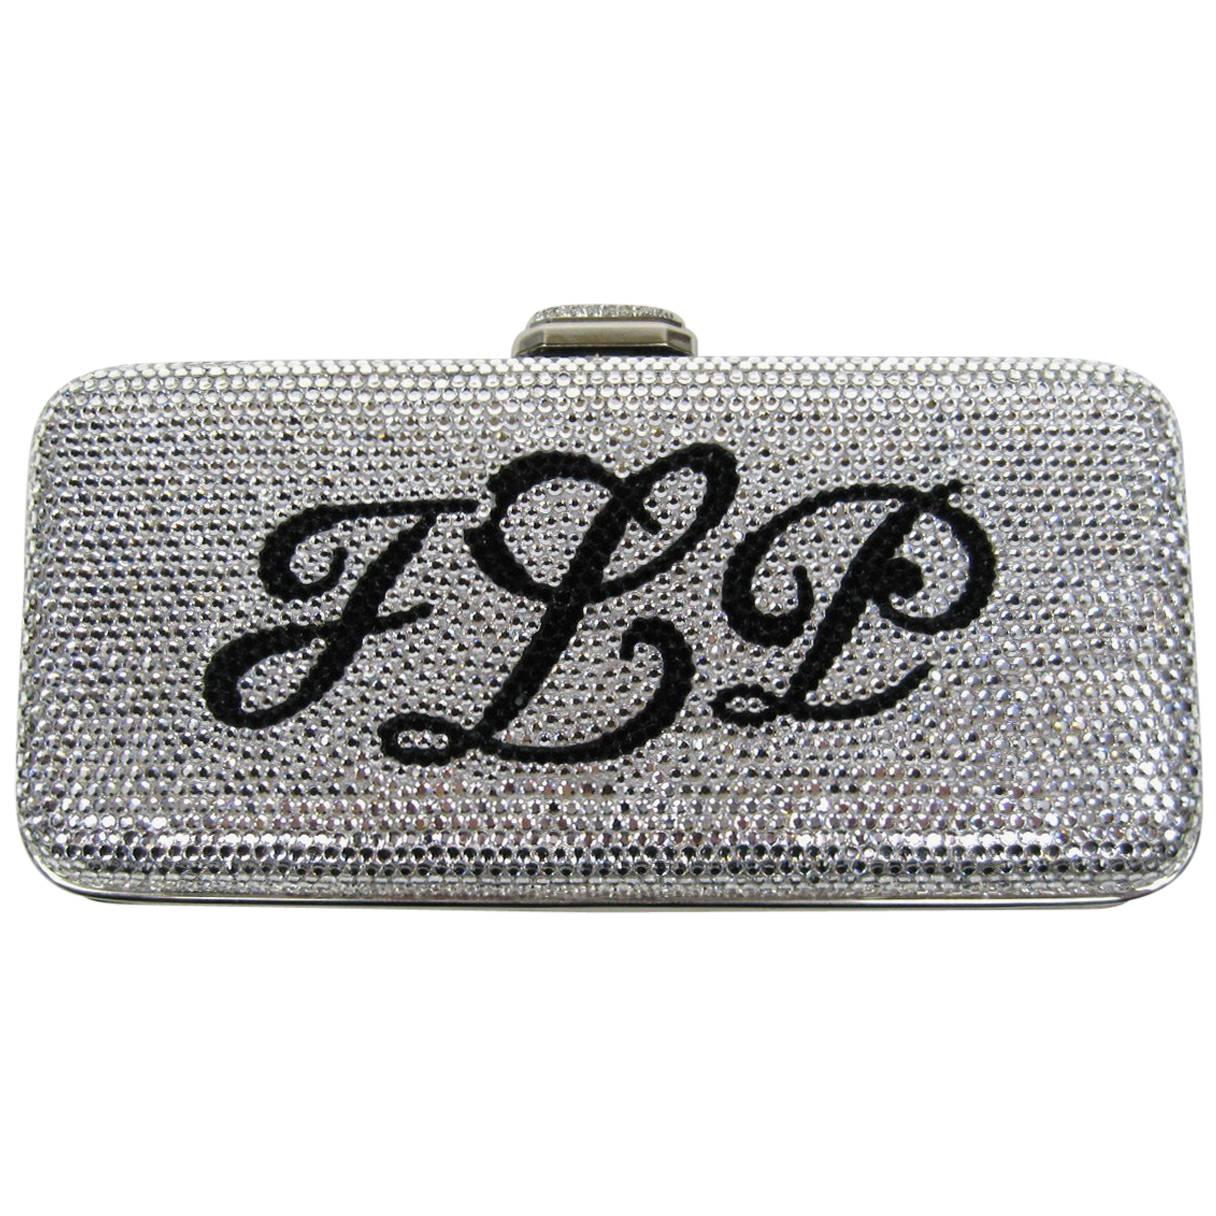 Judith Leiber Monogram Hinged Hard Shell Clutch JLP Double-sided Black and Silver crystals. 3.5 in H x 6 in W x 1 3/4 in D - 50 in. chain, New with Tags.  Please be sure to check our storefront for more fashion as we have both Vintage and